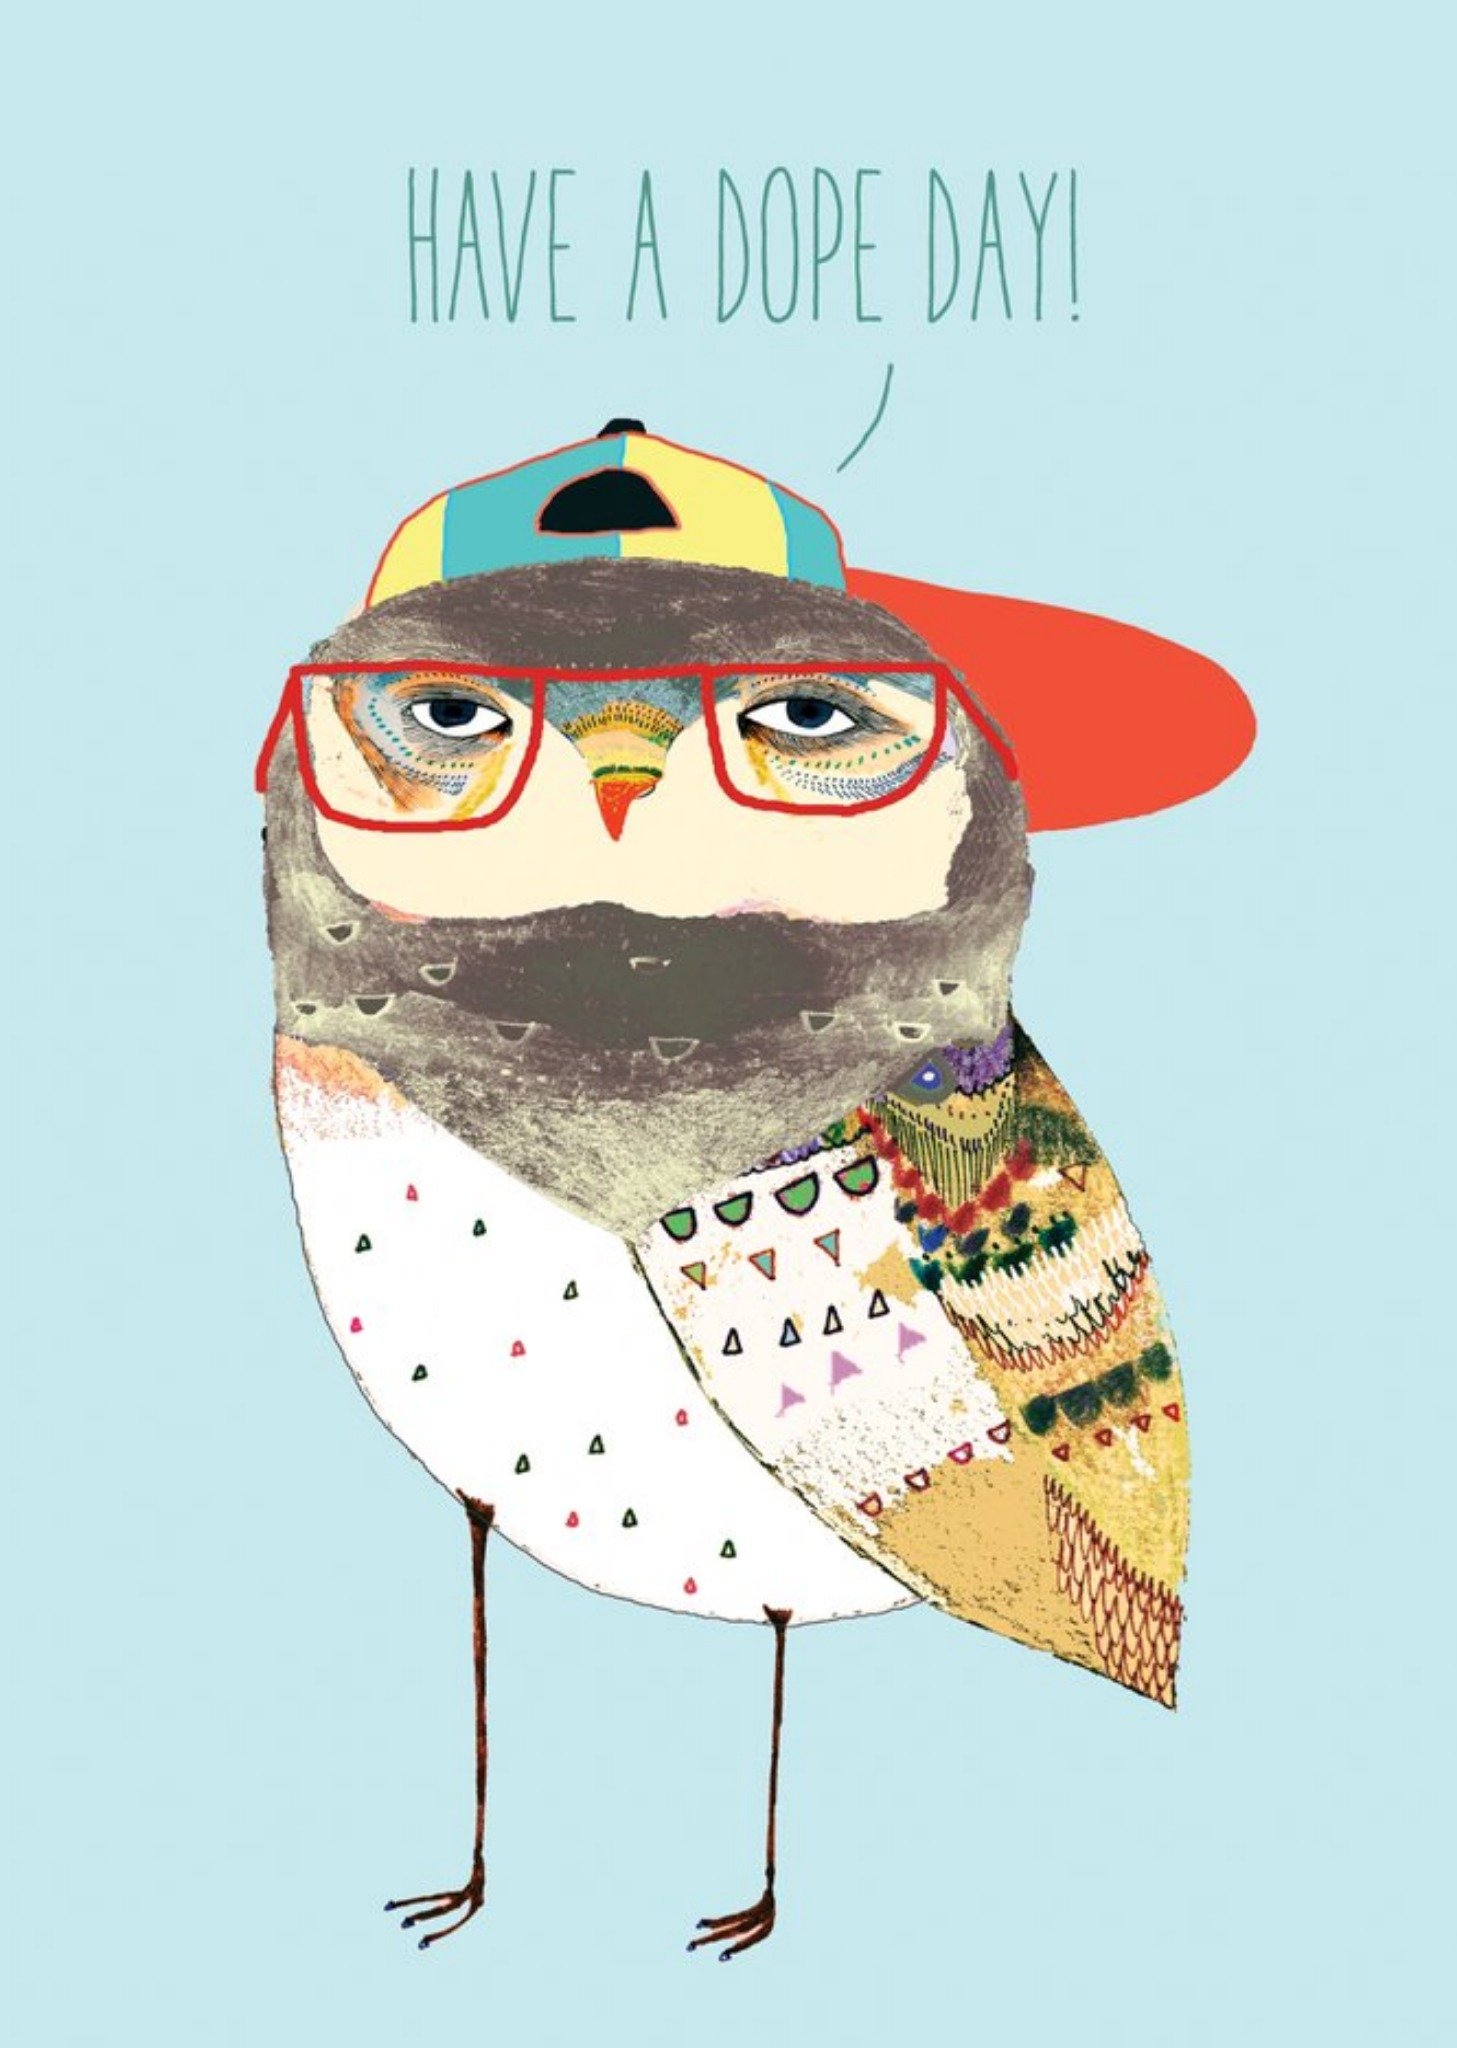 Brainbox Candy Funny Owl Cool Have A Dope Day Birthday Card, Large